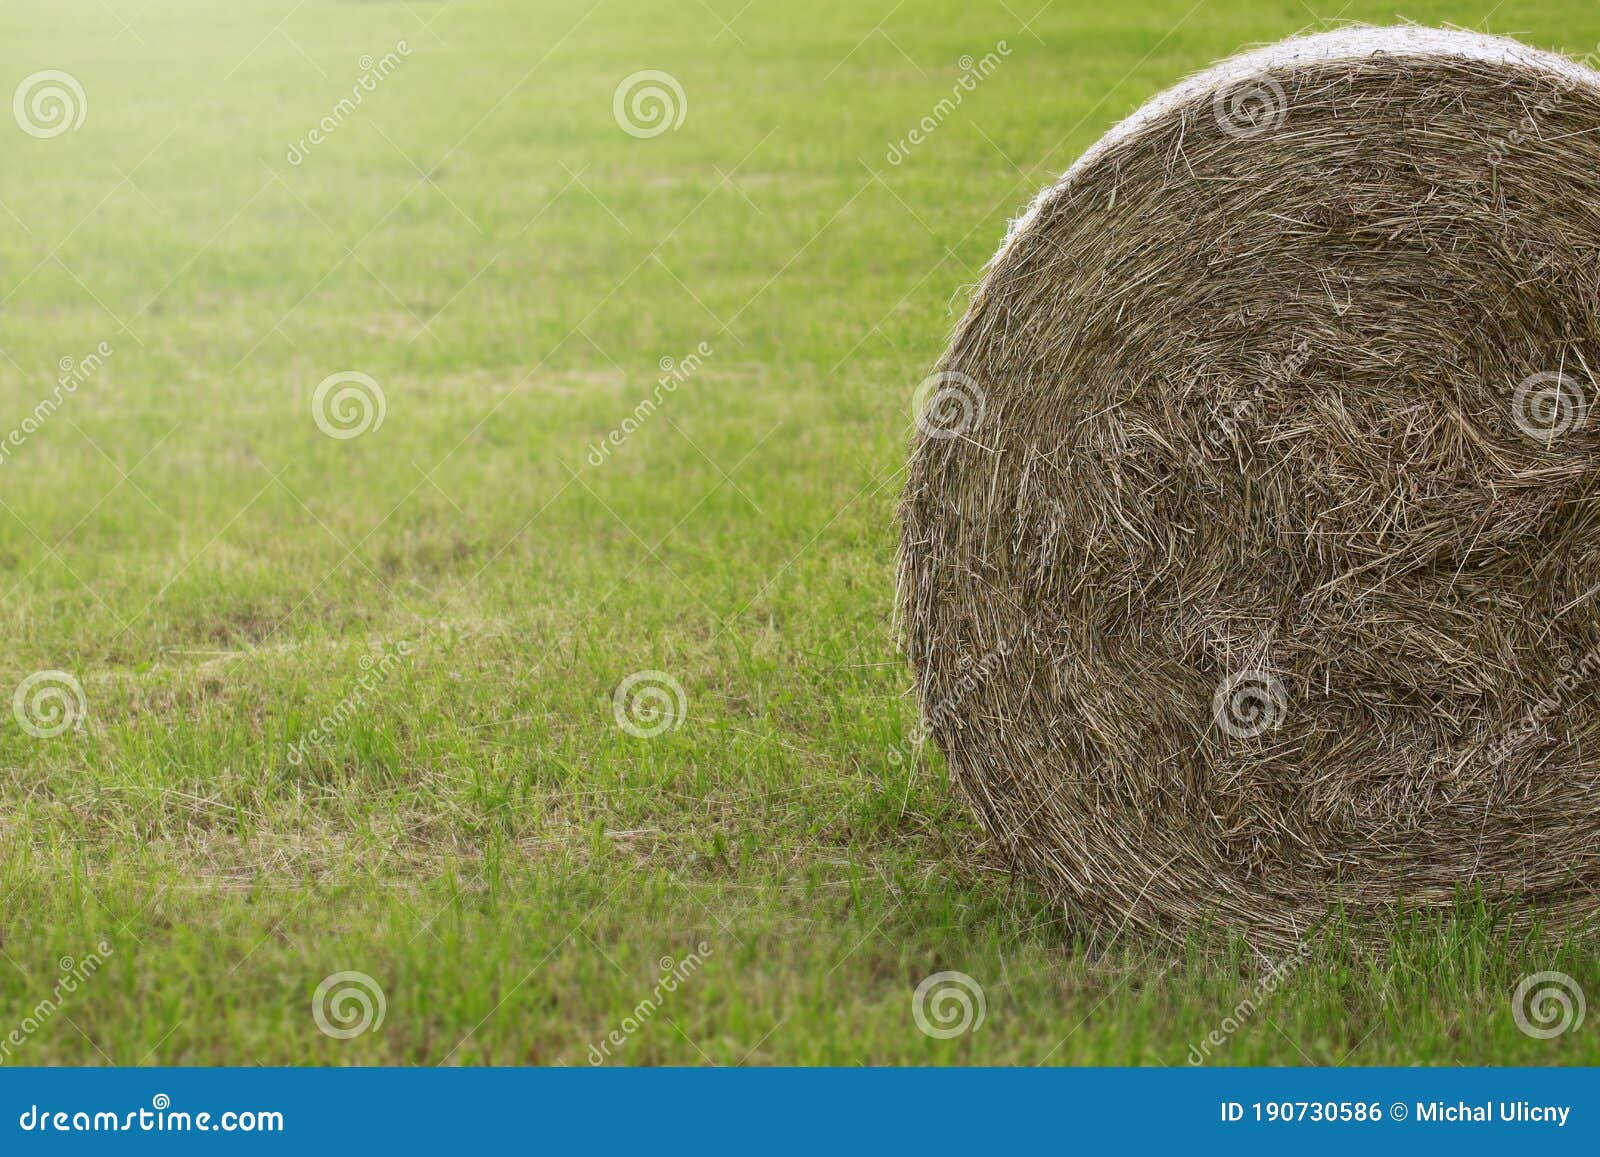 hay pack in a cut meadow. detail and place to describe